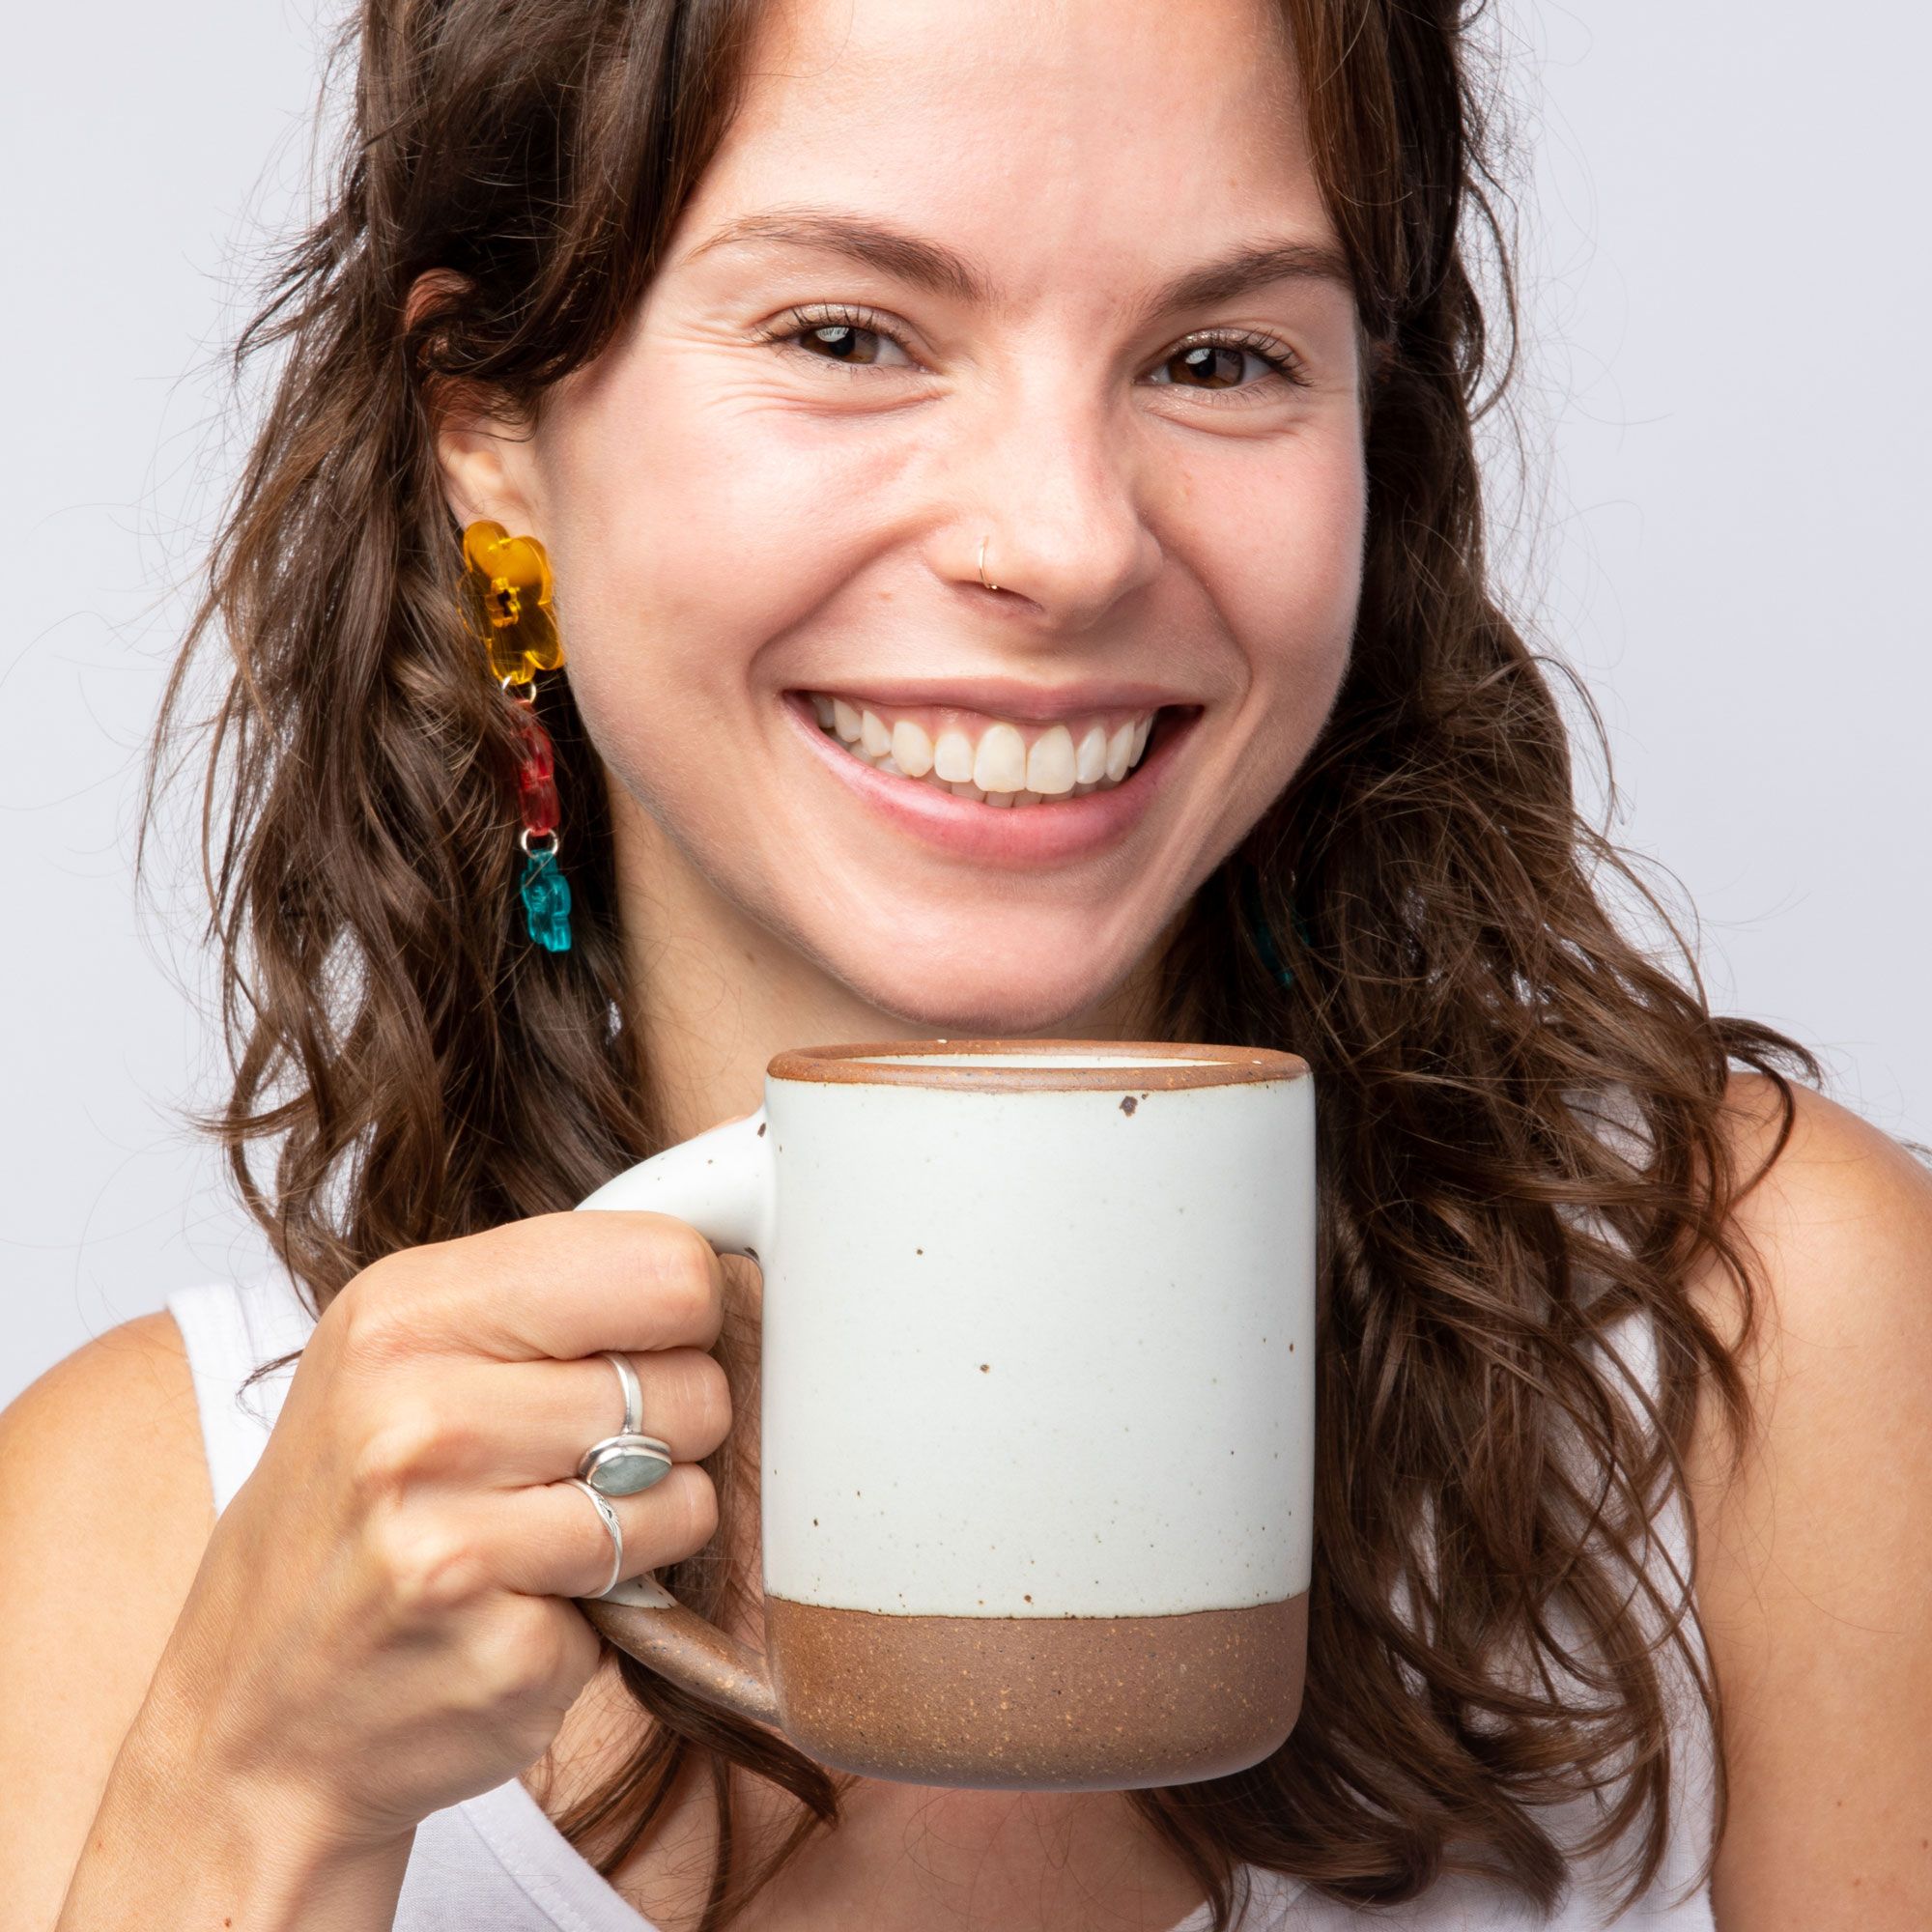 A woman smiling and holding a medium sized ceramic mug with handle in a cool white color featuring iron speckles and unglazed rim and bottom base.